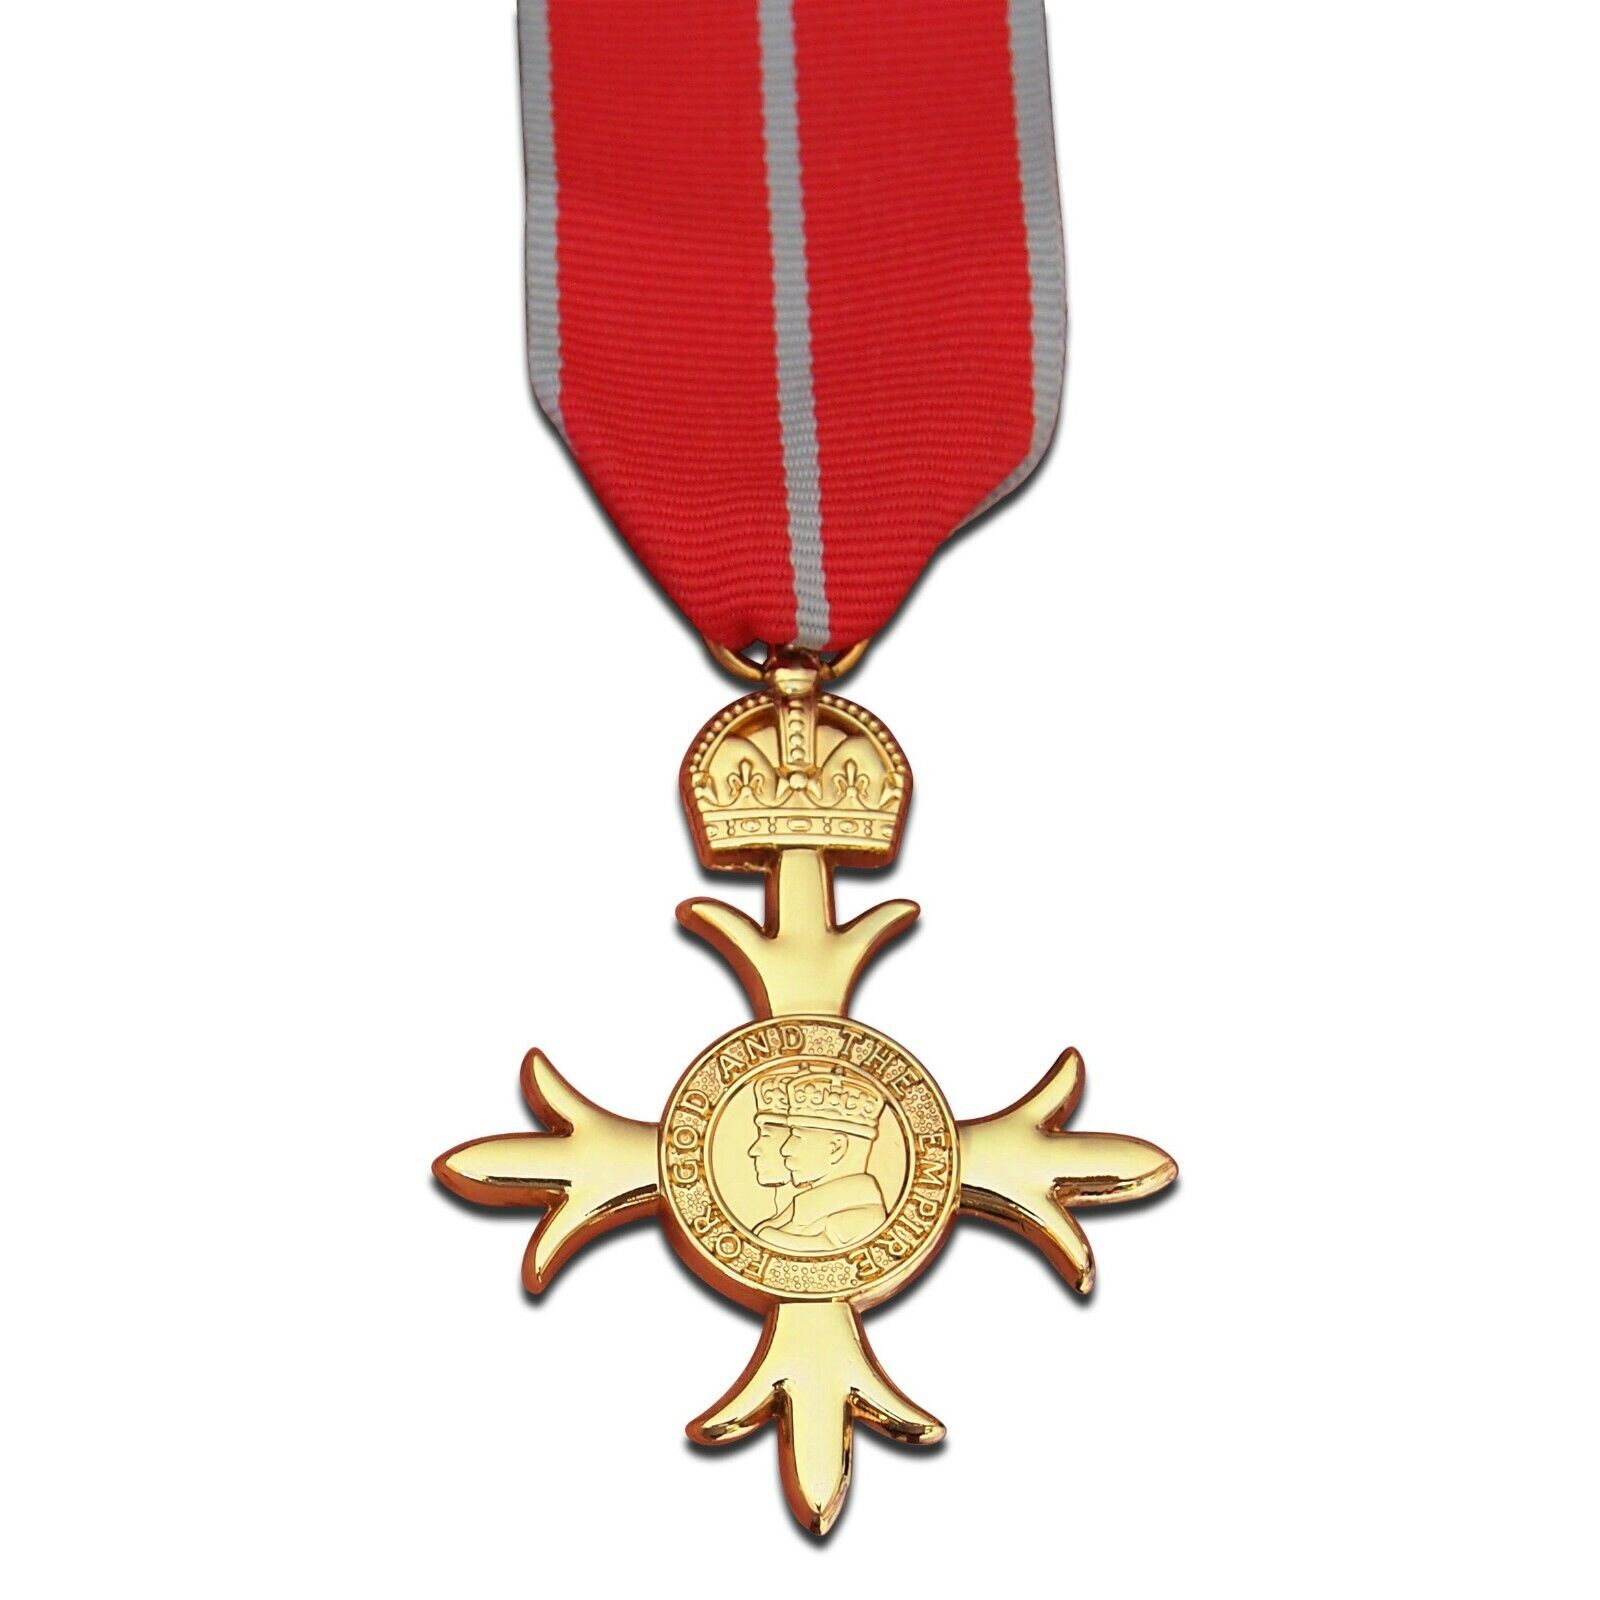 Full Size OBE Medal with Ribbon for Military Officer British Empire Award Copy